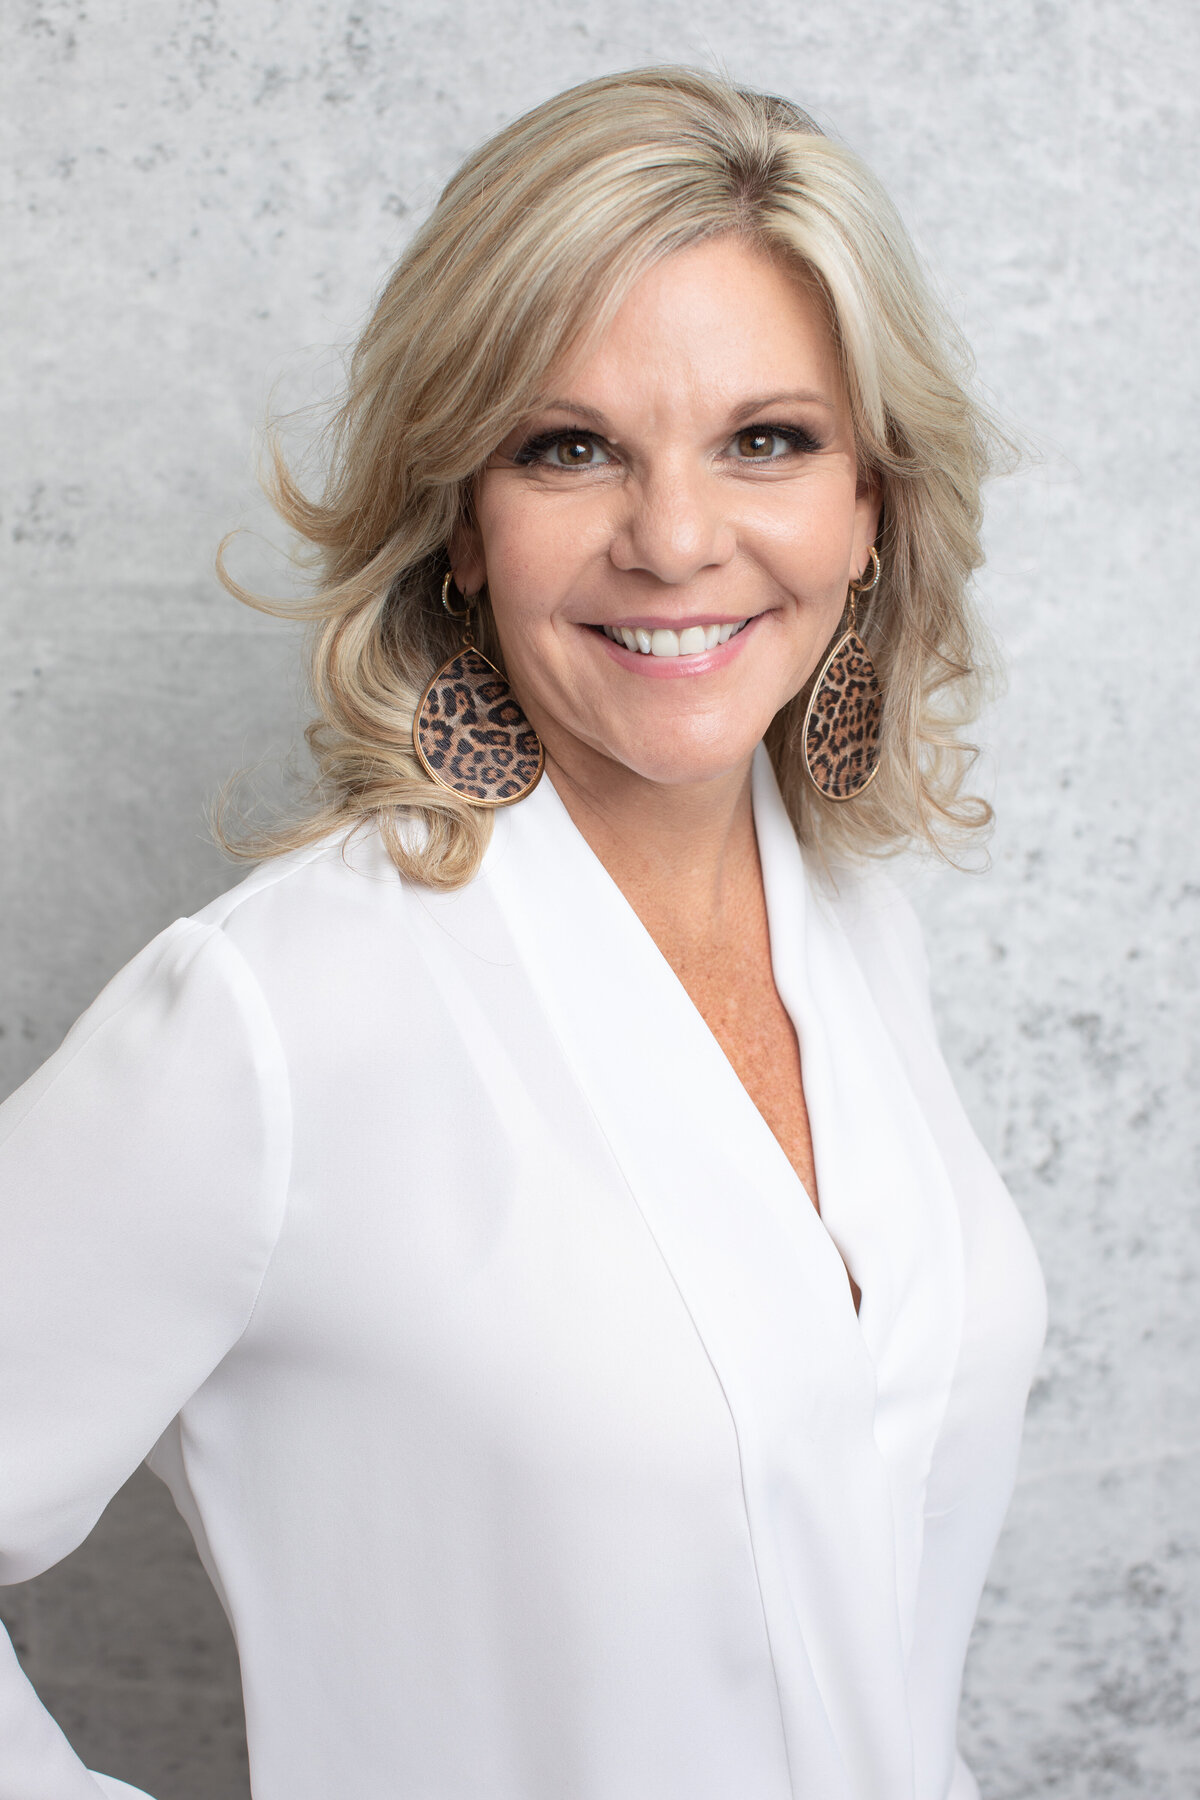 Cincinnati portrait capturing a radiant woman with wavy blonde hair, donning statement leopard-print earrings and a white blazer. The image highlights poised and sophisticated studio photography.